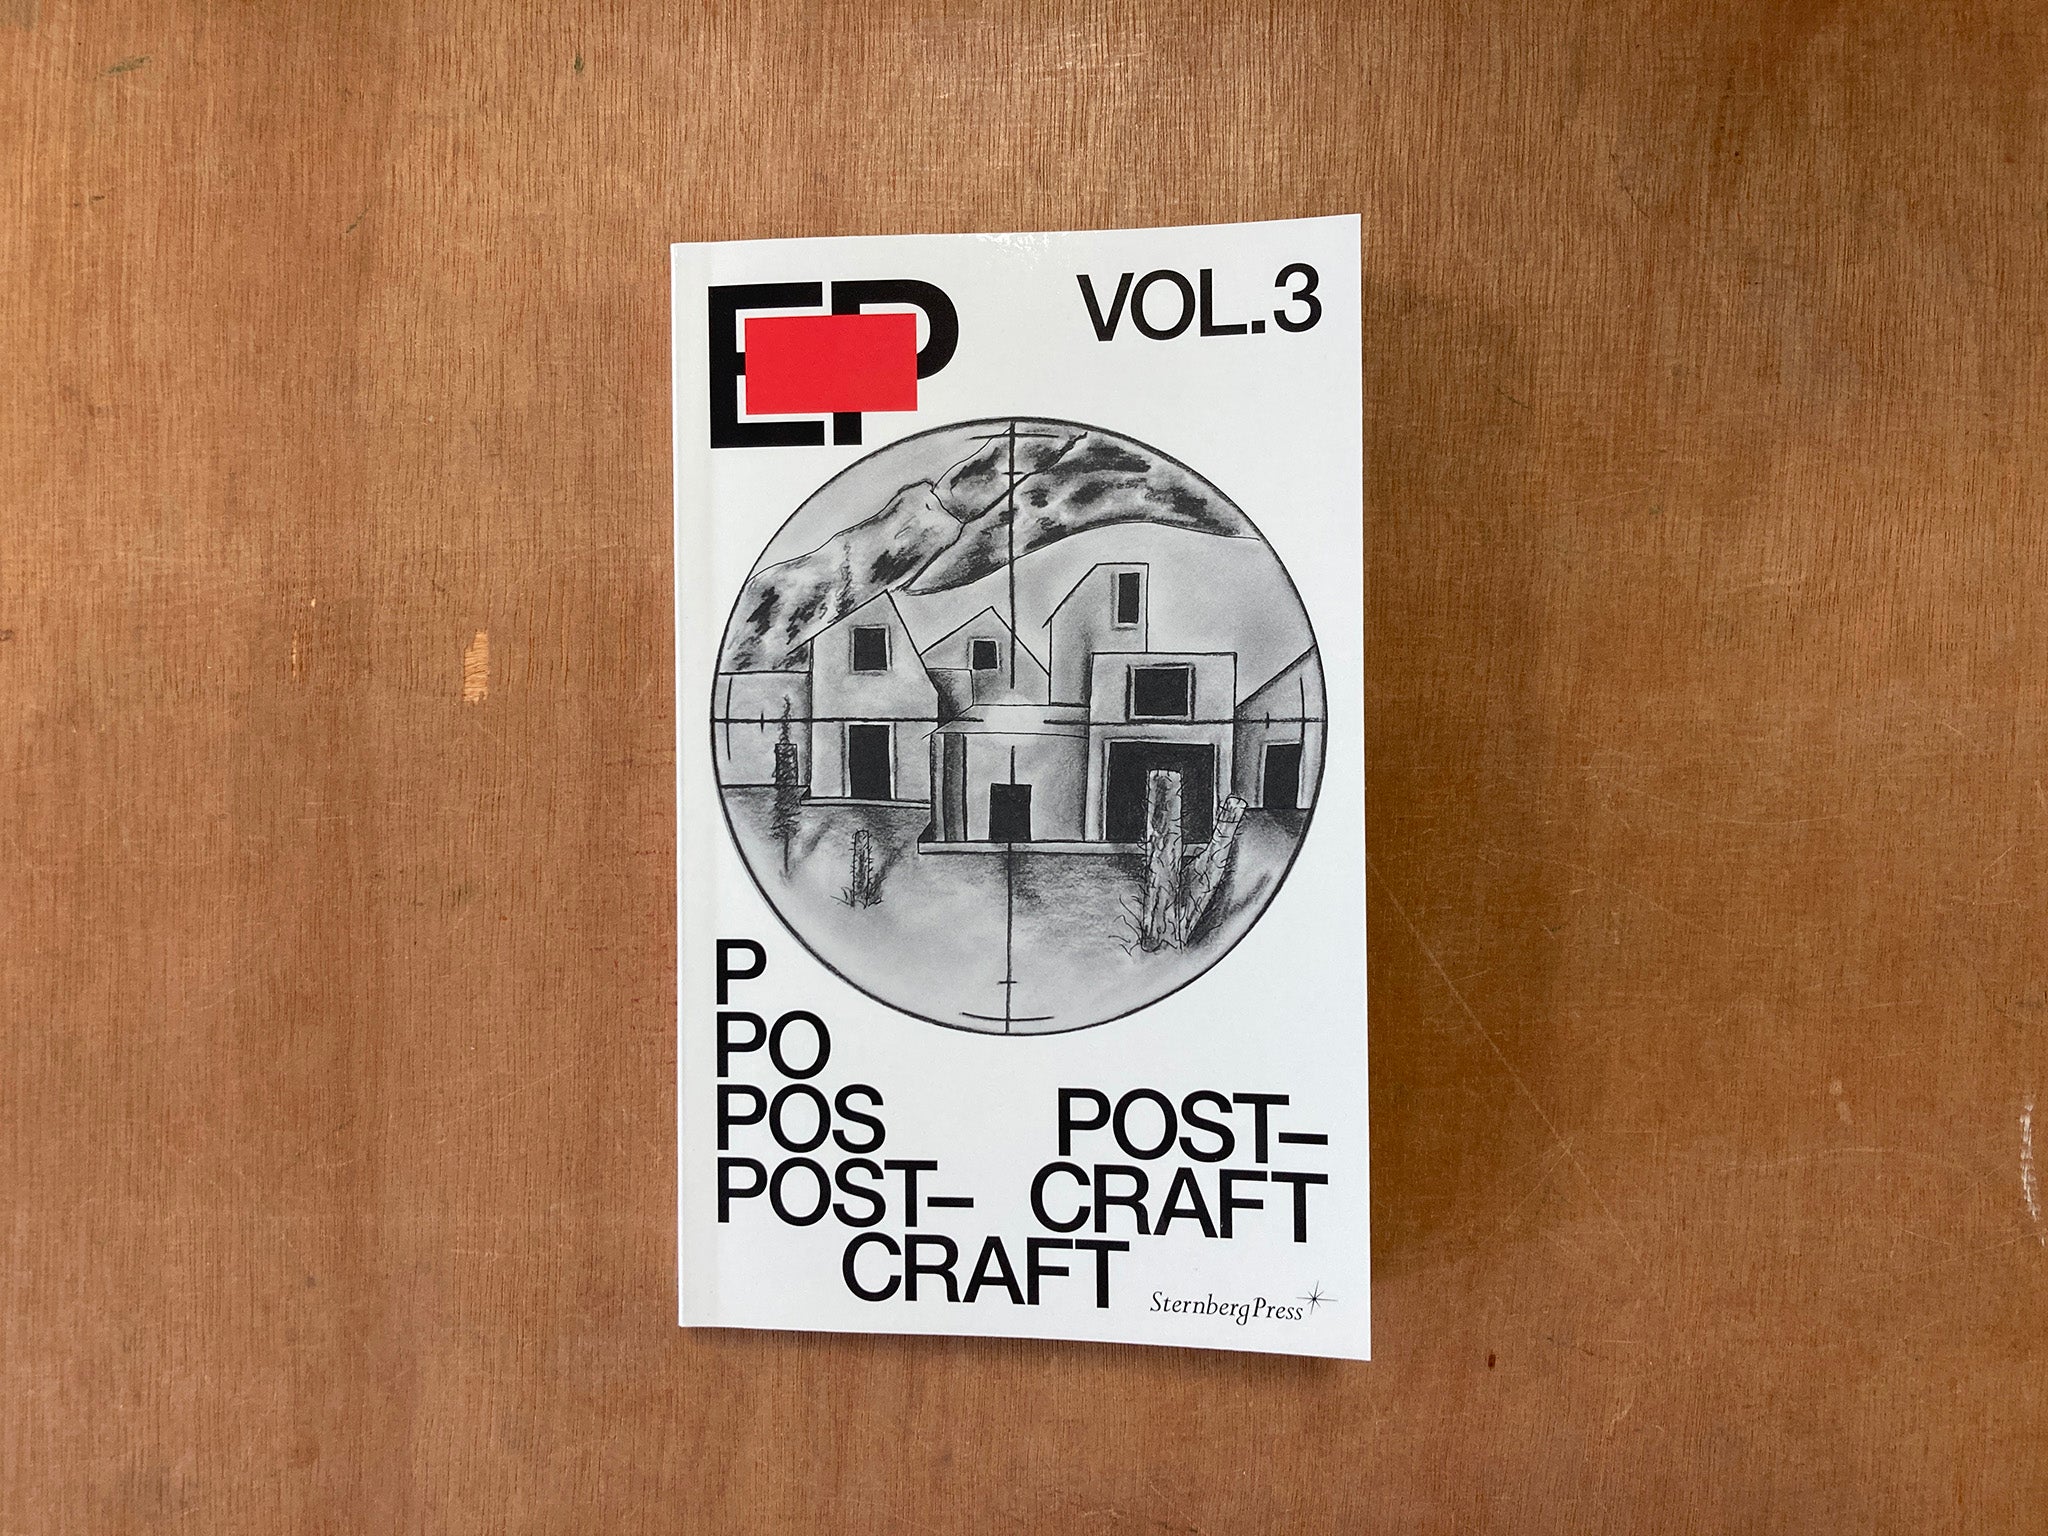 EP VOL. 3 - POST-CRAFT edited by Catharine Rossi and Alex Coles